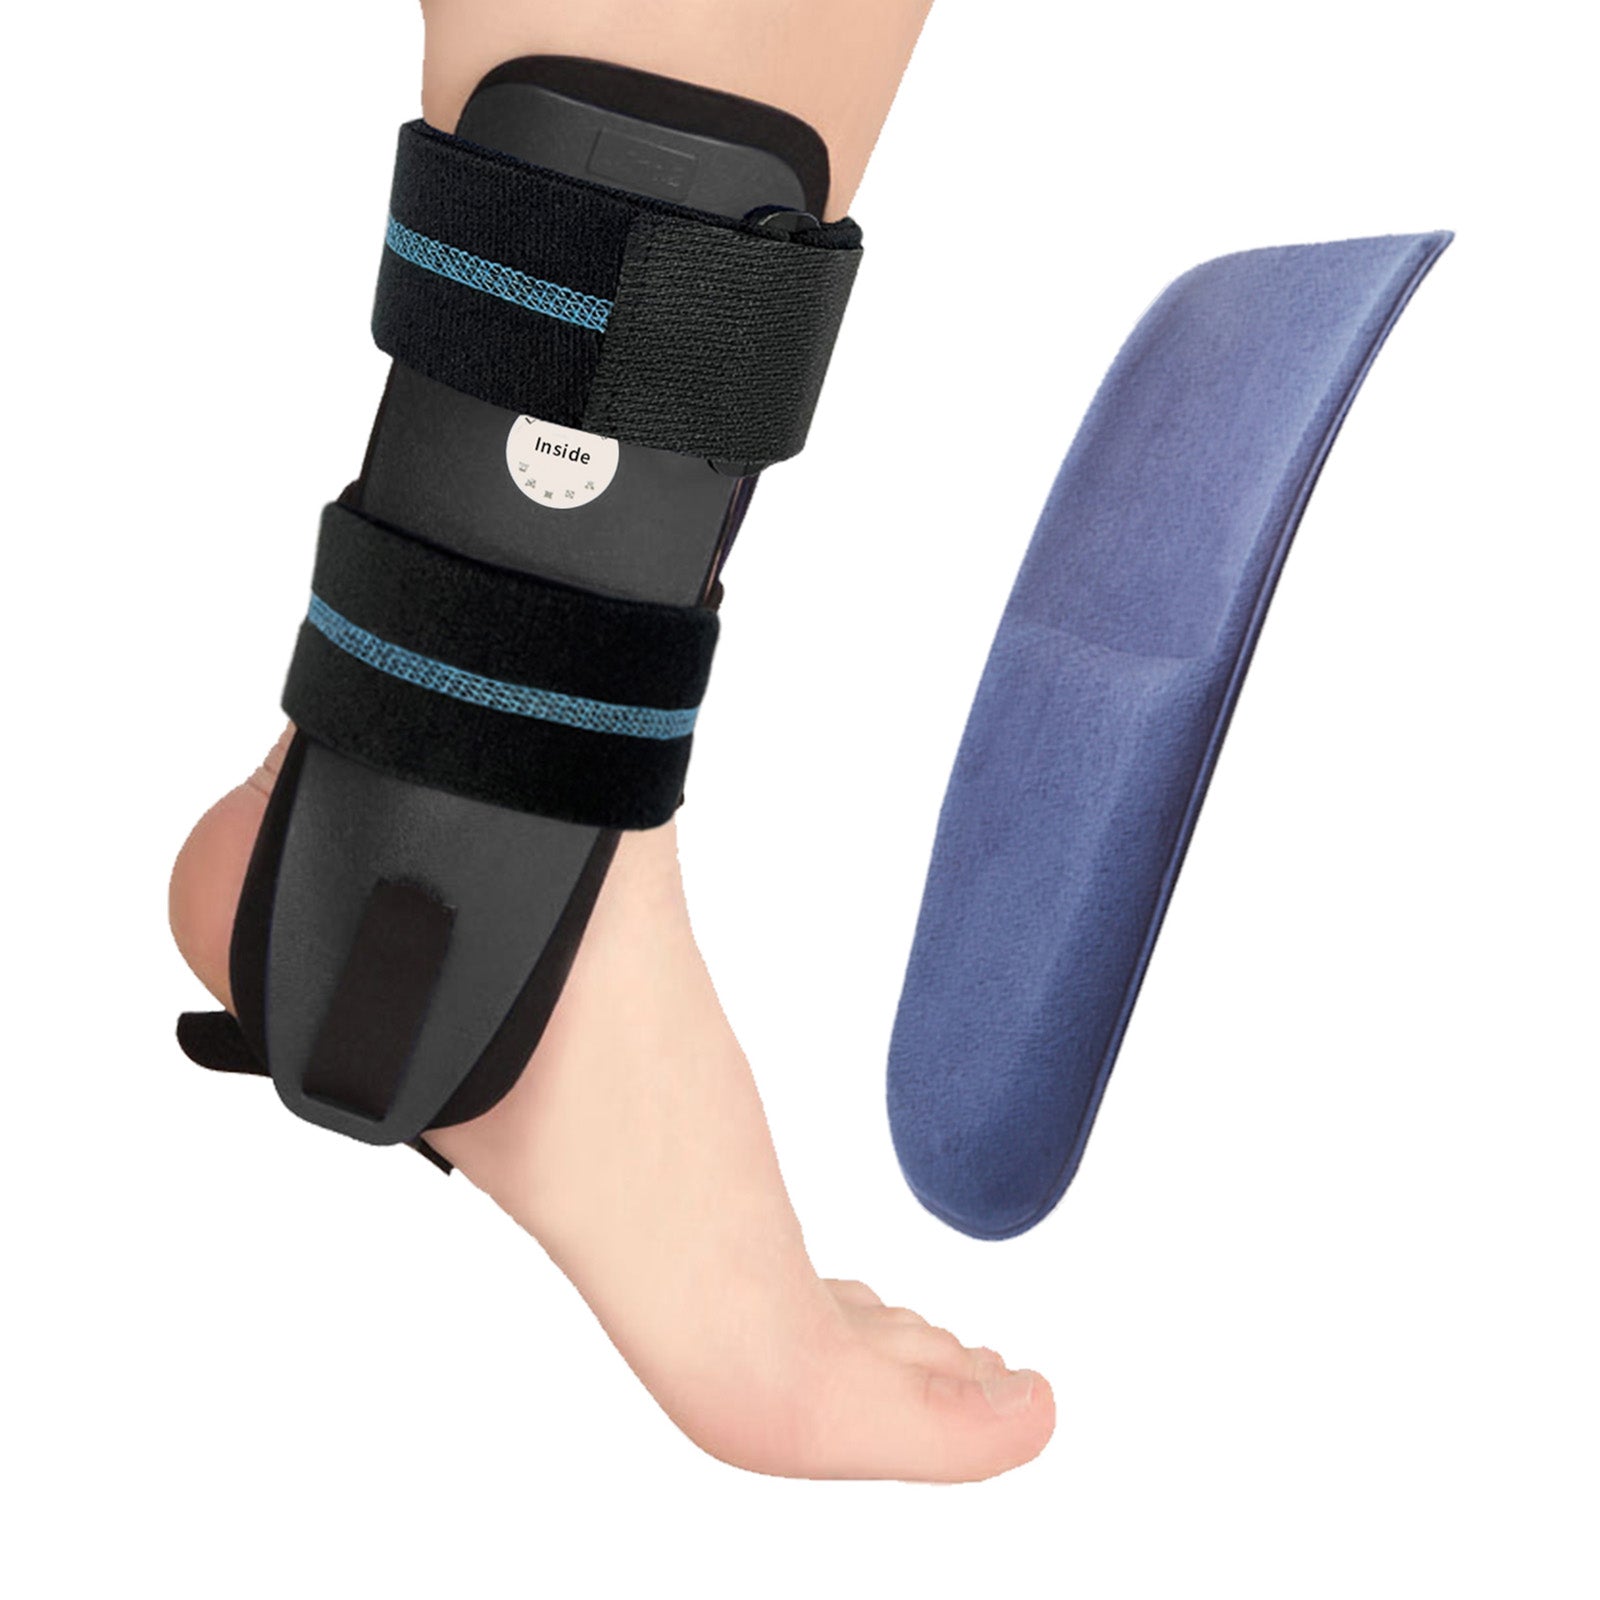 Lohmann Rauscher Velpeau Laxiteral ankle support Comfort - Easypara